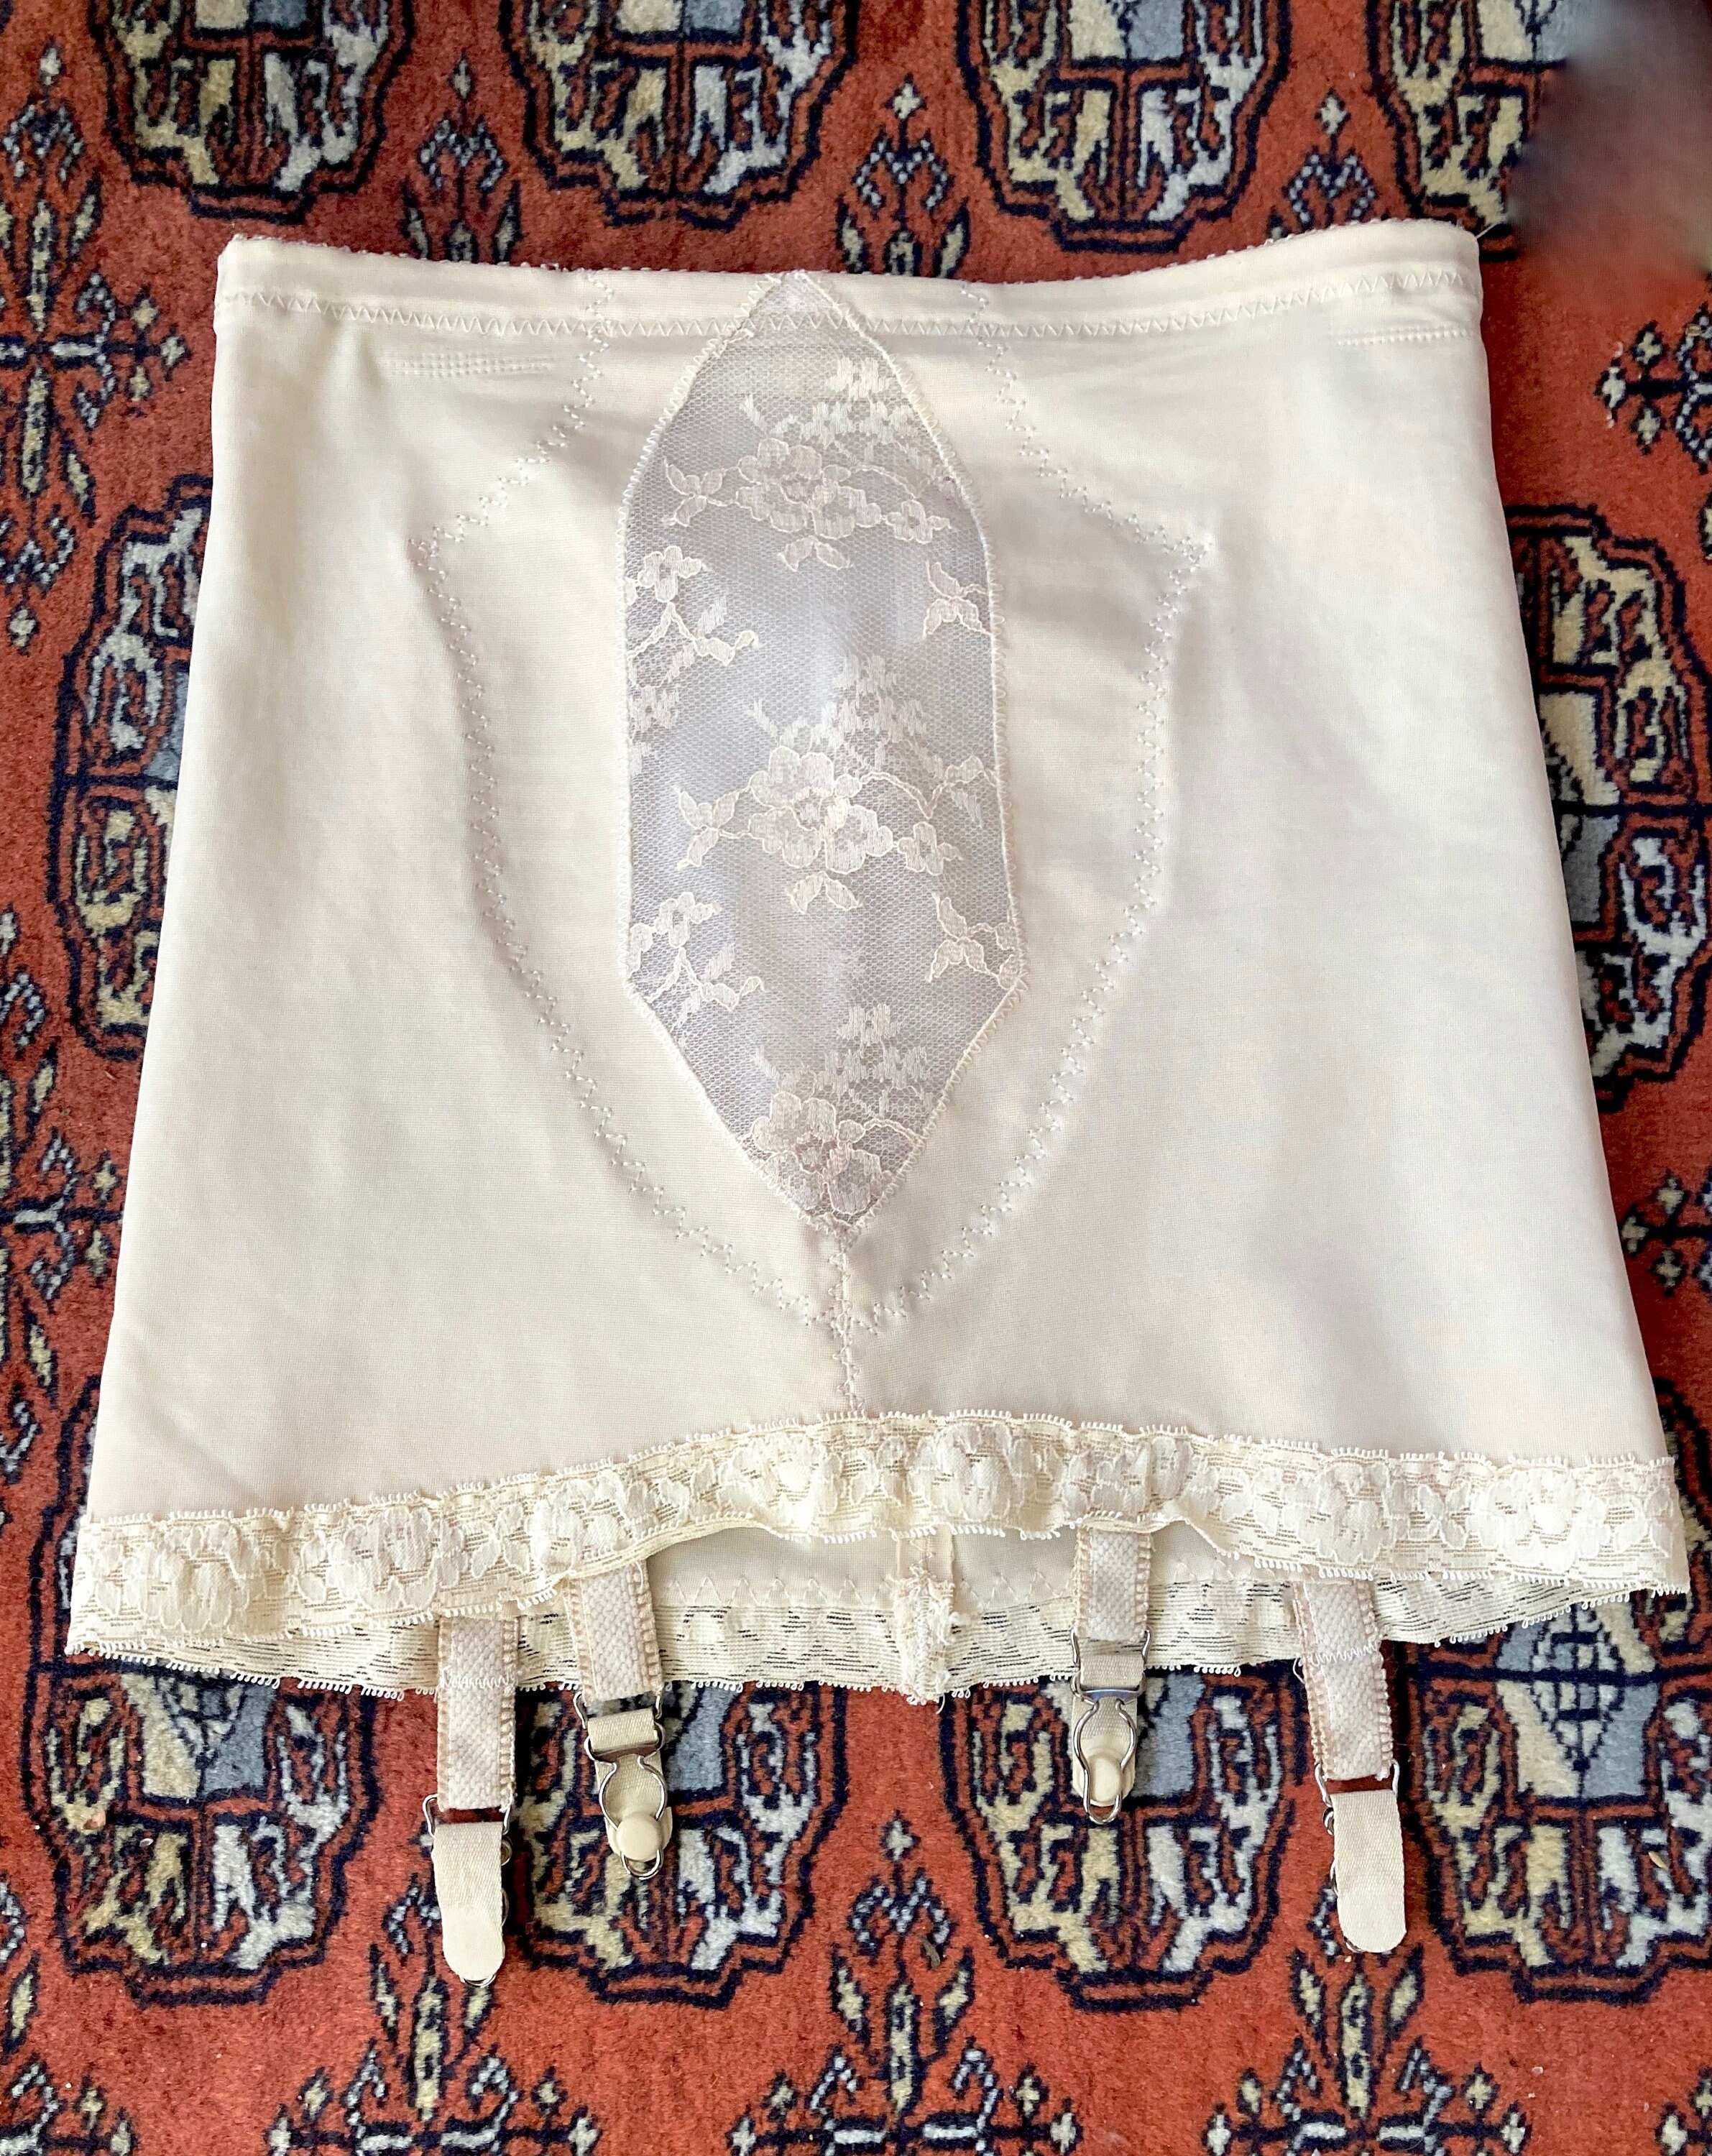 Vintage New Playtex Double Diamonds Firm Open Bottom Girdle With 6